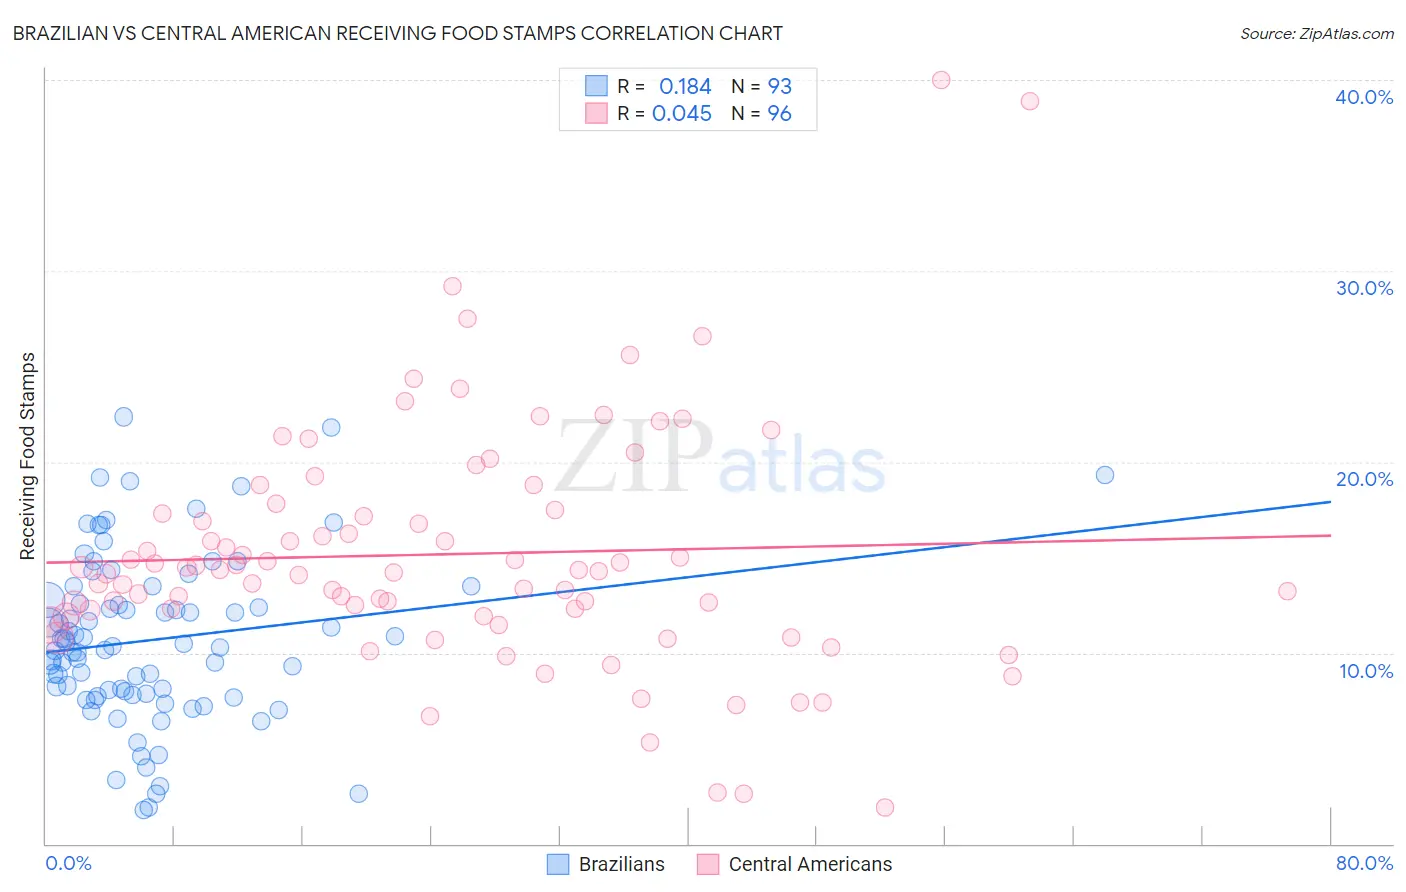 Brazilian vs Central American Receiving Food Stamps